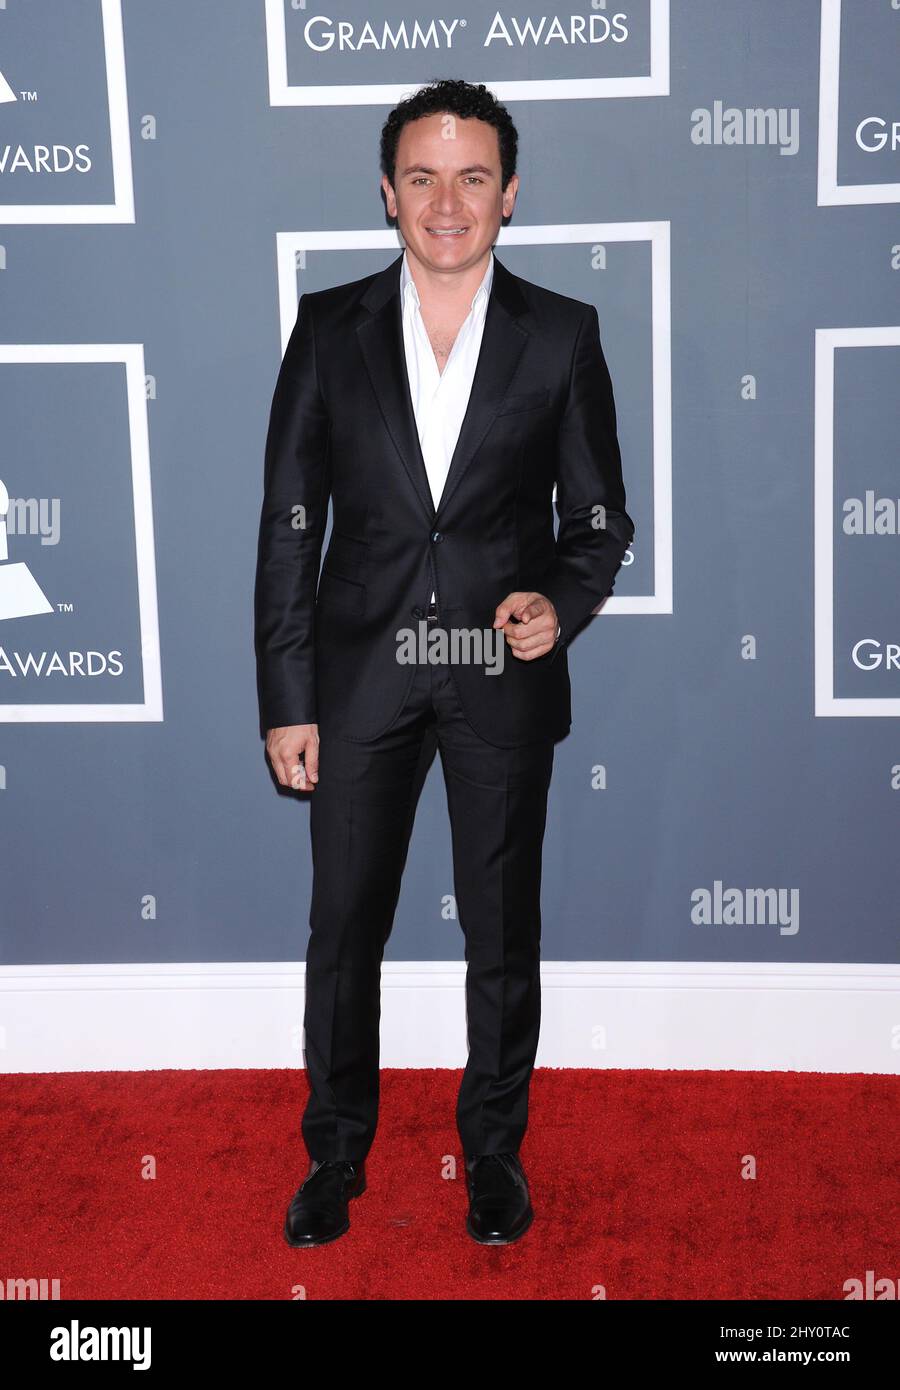 Fonseca arriving for The 55th Annual Grammy Awards held at Staples Center, Los Angeles. Stock Photo